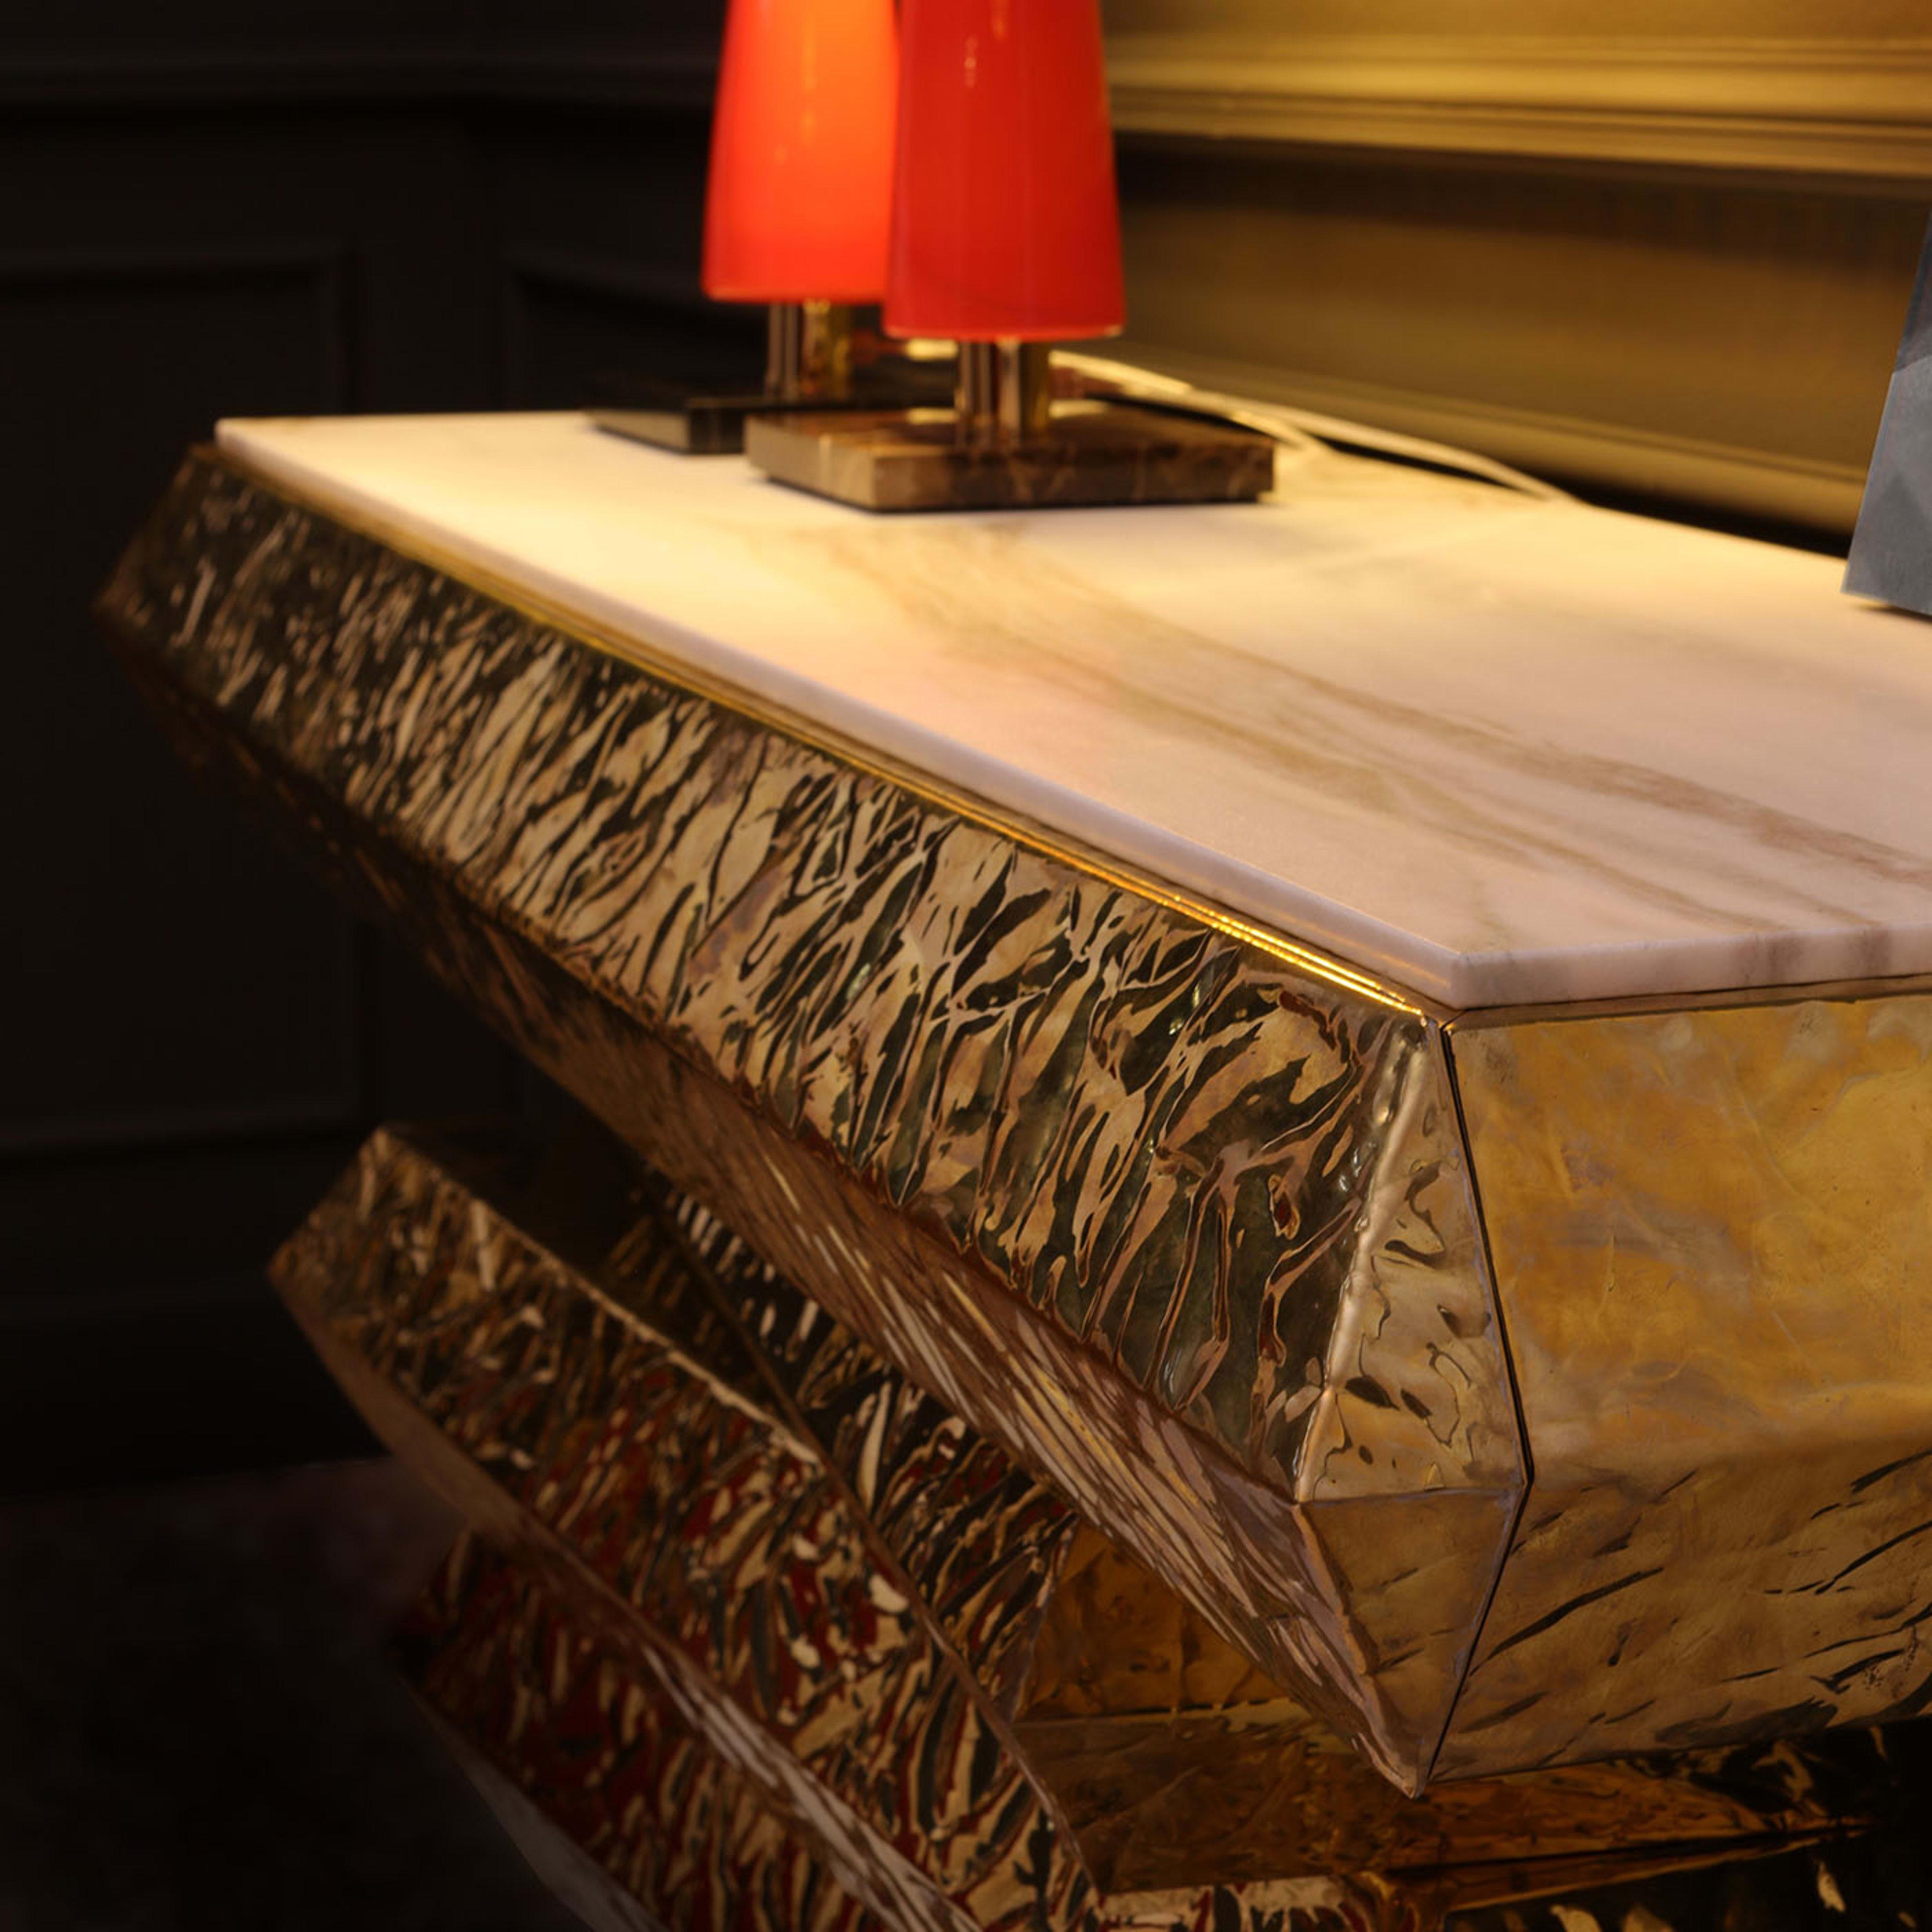 This console was designed to make a stupefying statement in the entryways of exclusive interiors. Achieved thanks to a deft process of manual chiseling, the goldbrick-like elements composing its gleaming structure are arranged in a dynamic way that